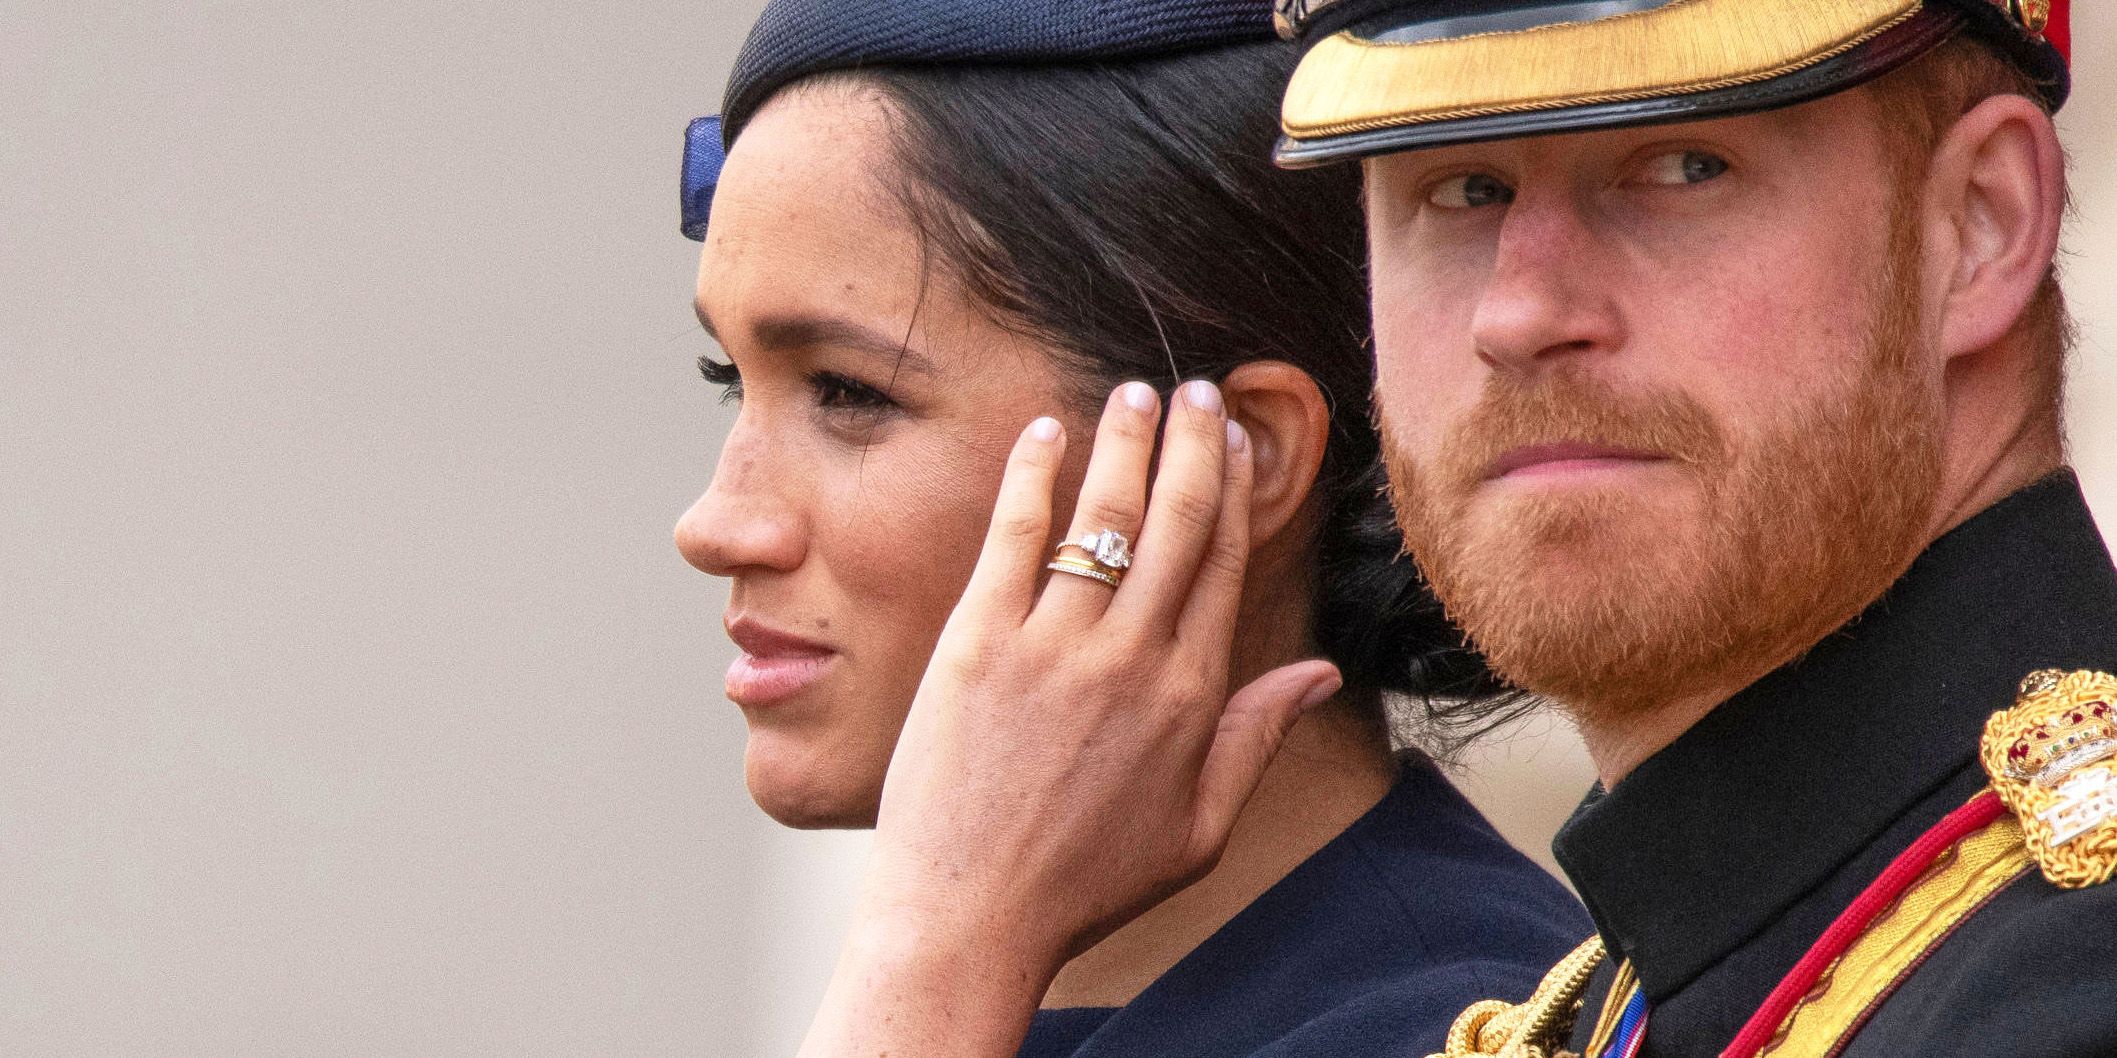 Is Meghan Markle wearing a redesigned engagement ring?